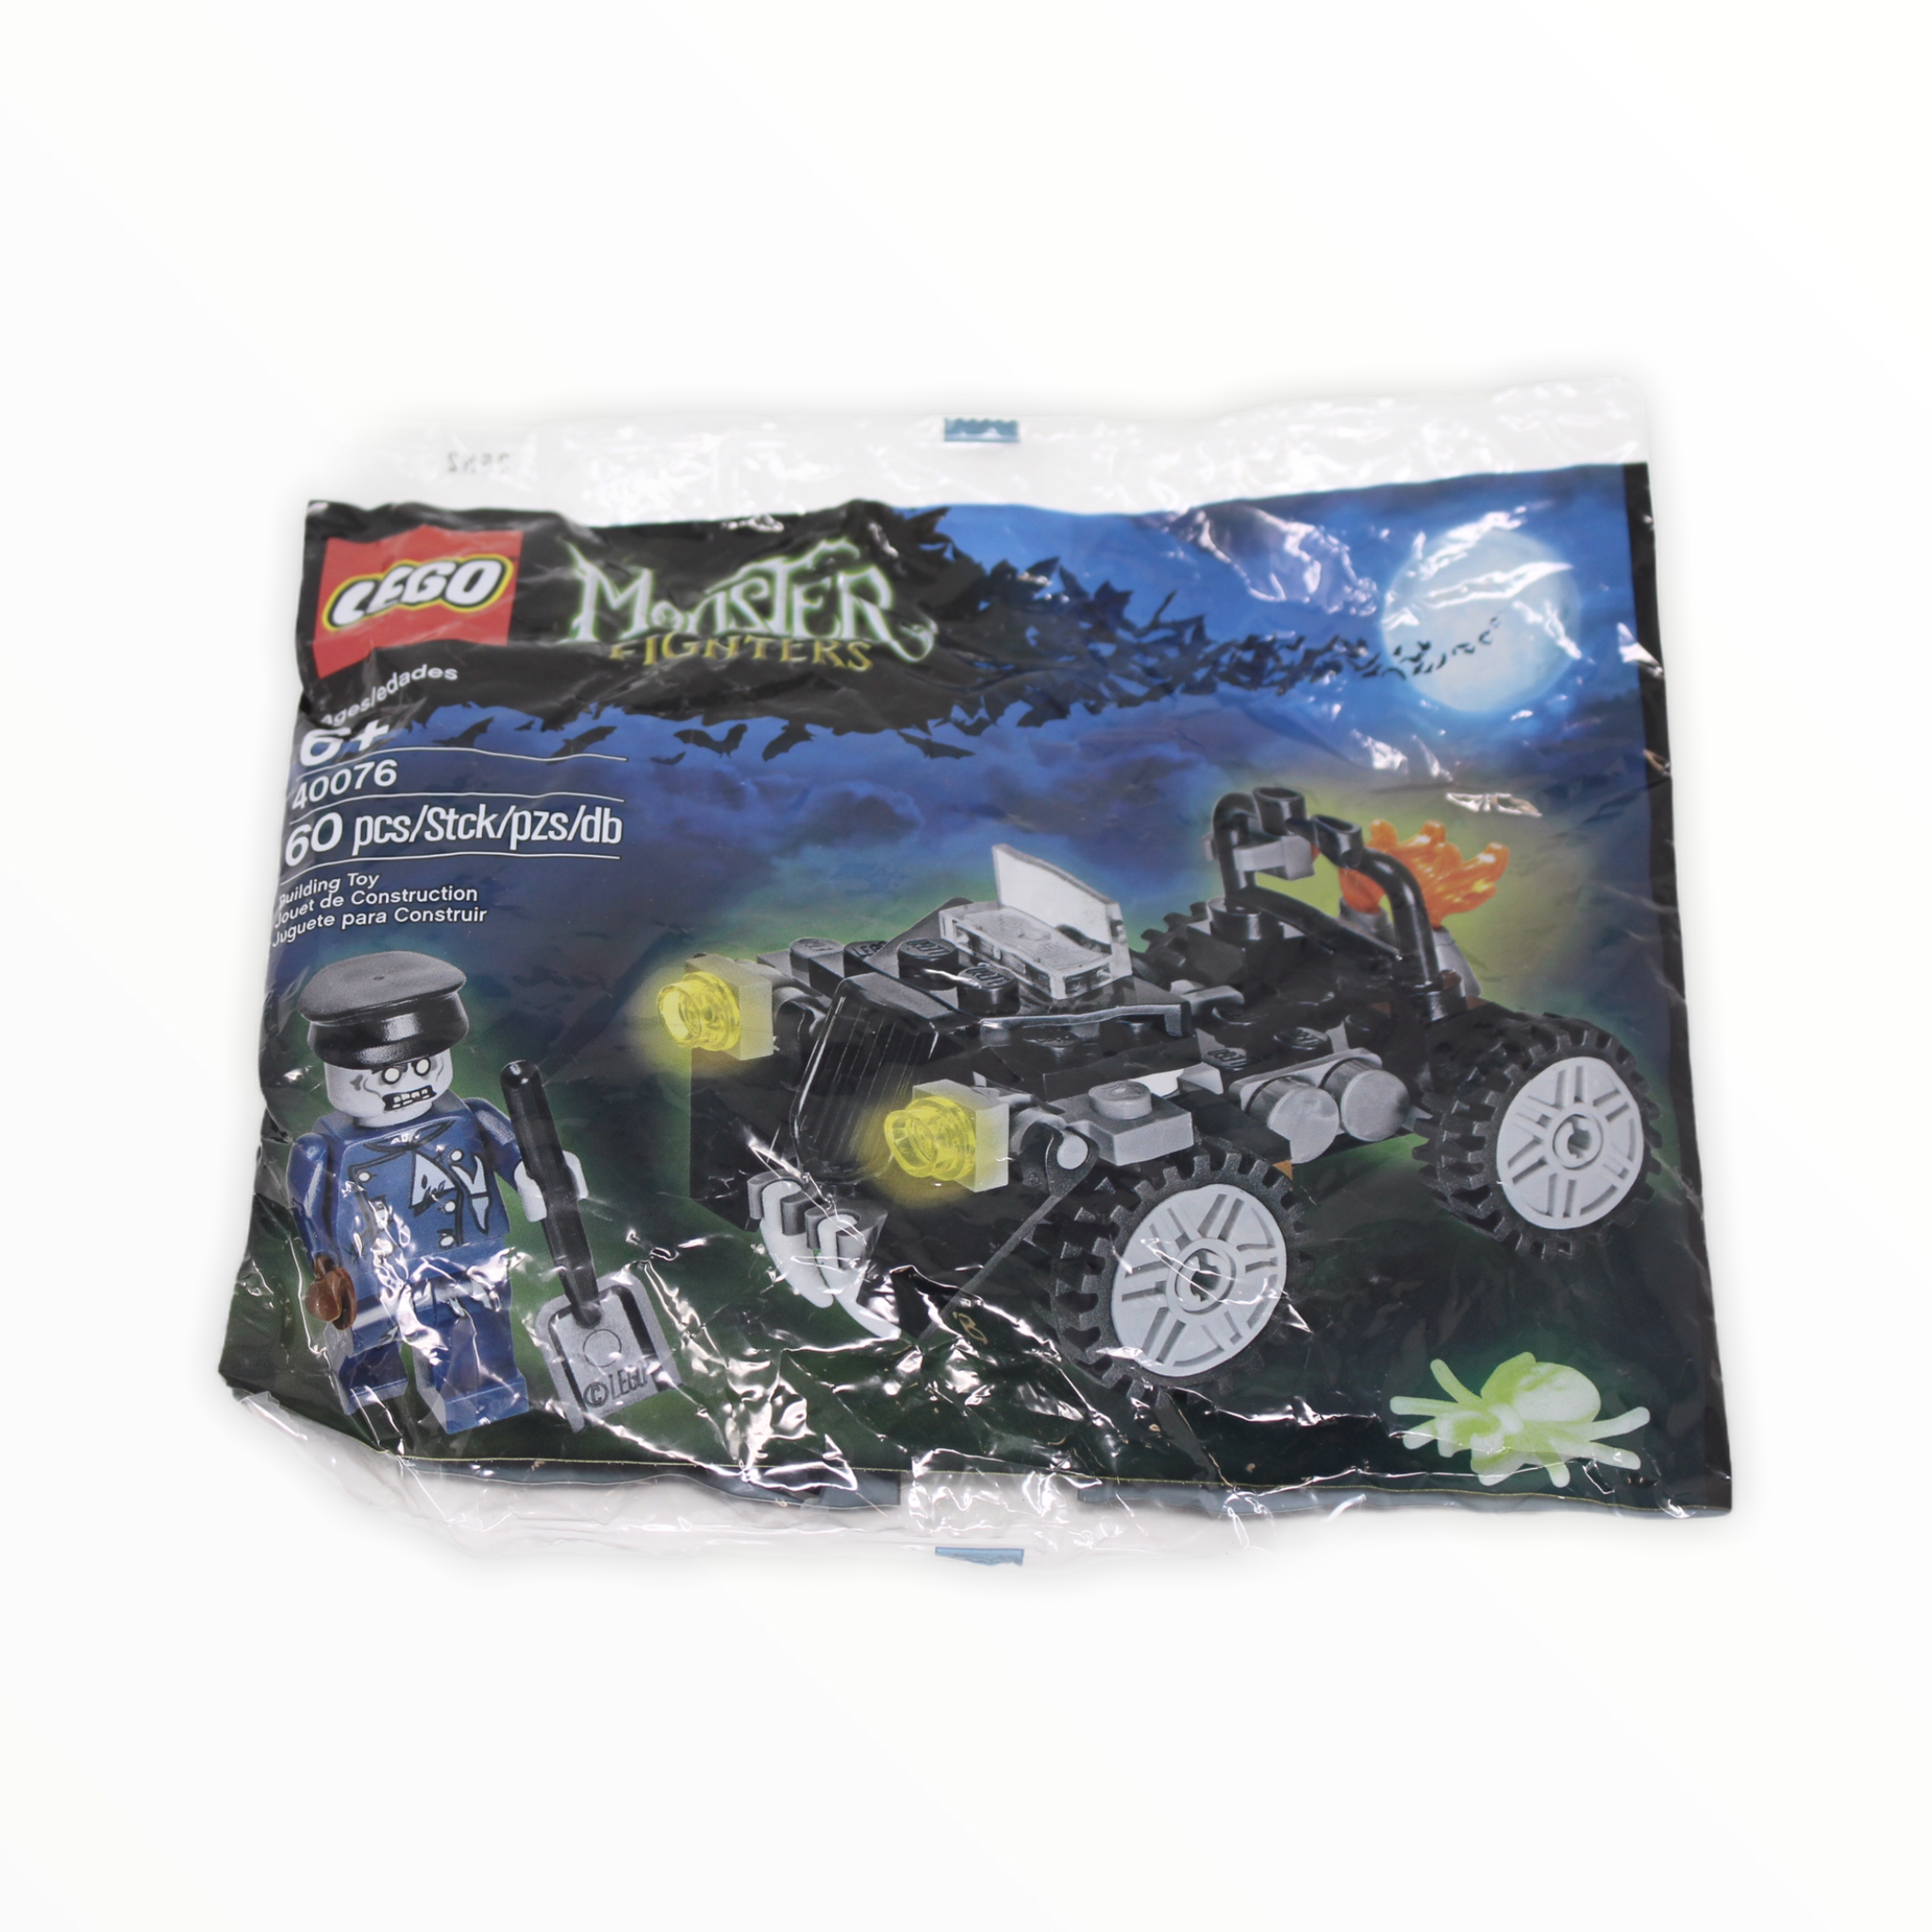 Polybag 40076 Monster Fighters Zombie Car